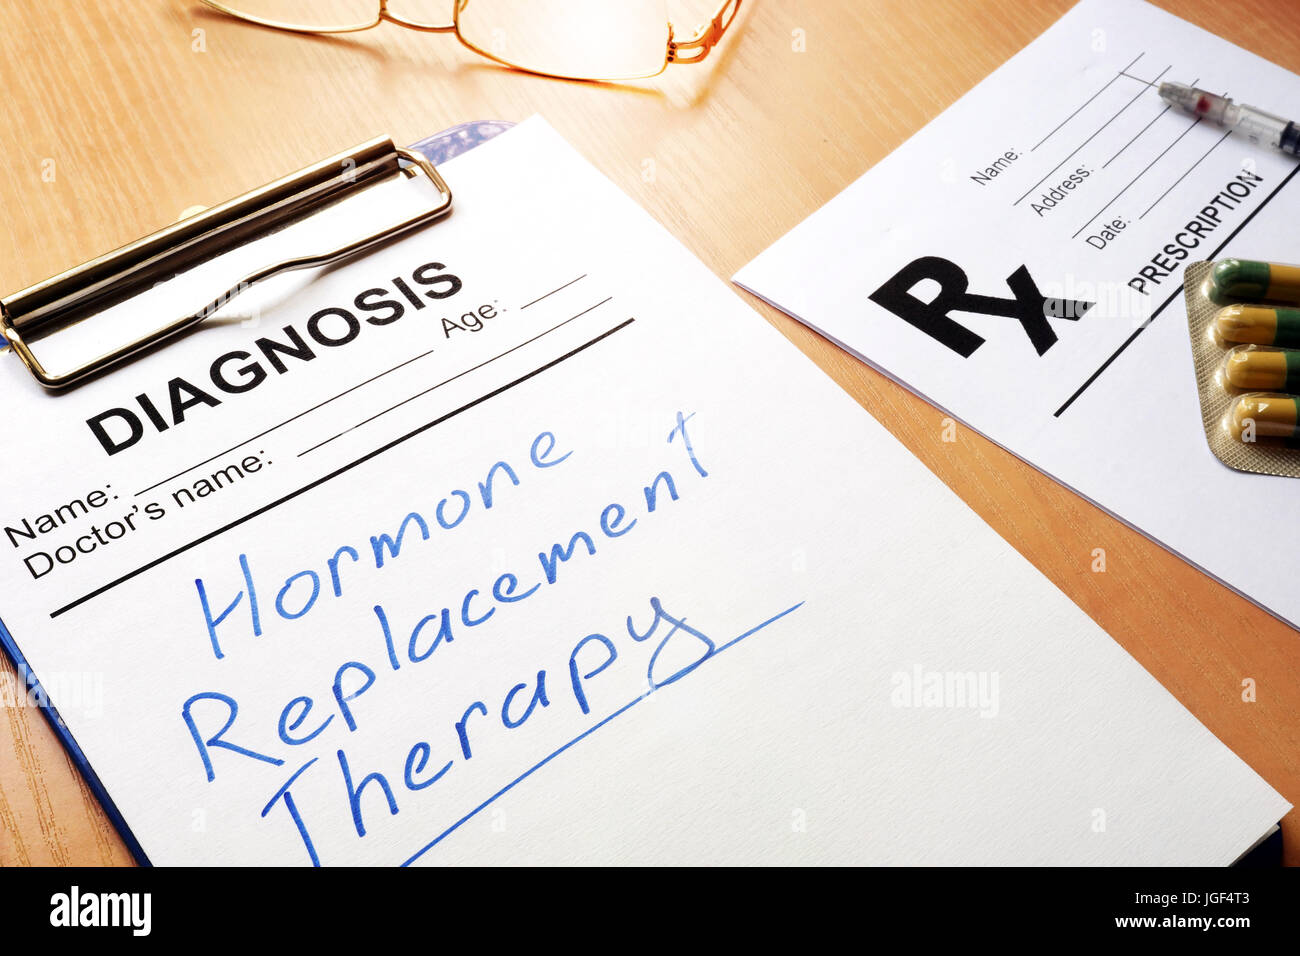 Clipboard with medical form and sign Hormone Replacement Therapy. Stock Photo